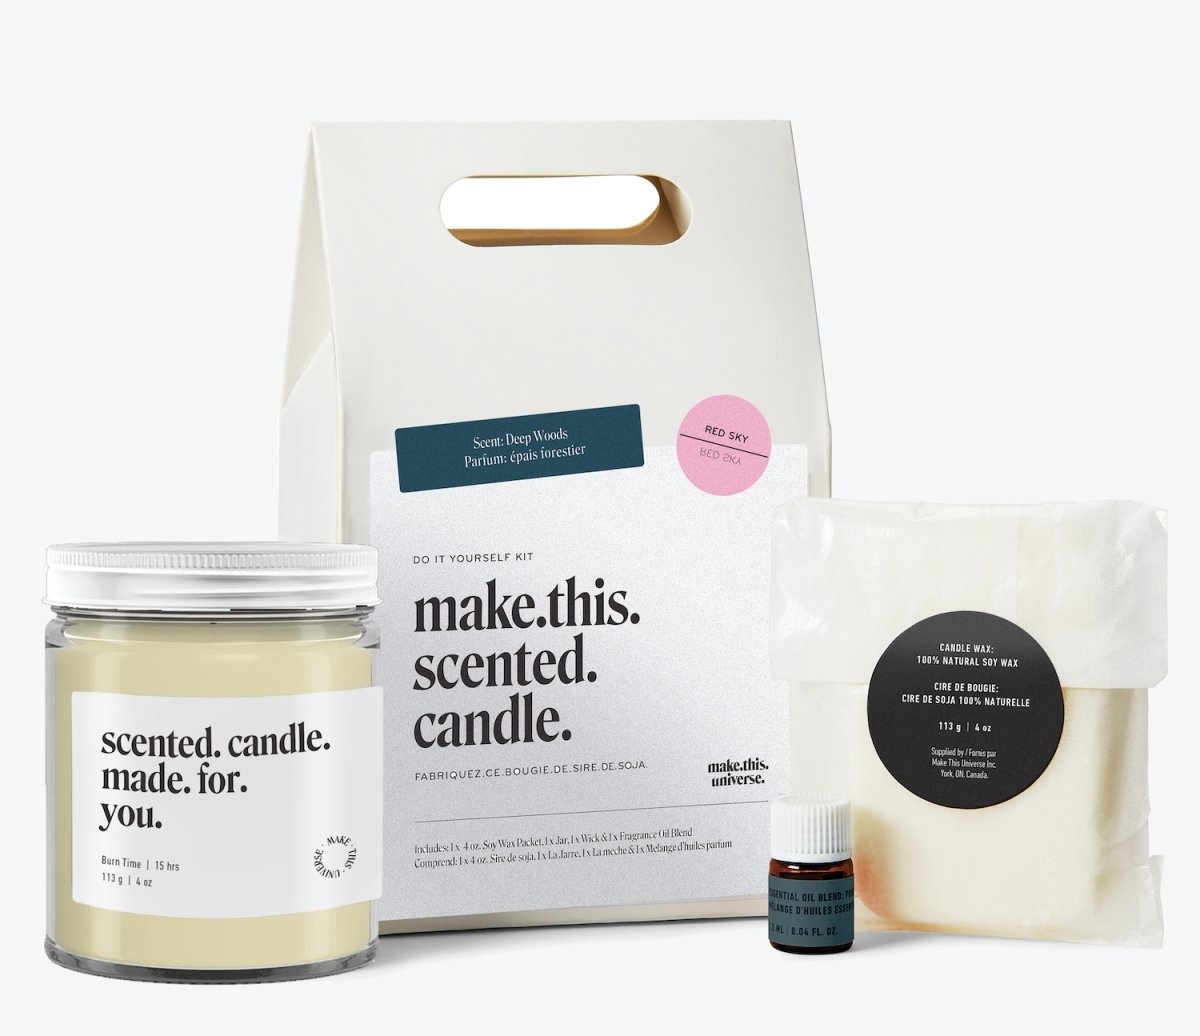 Make This Universe Inc. Scented candle kit